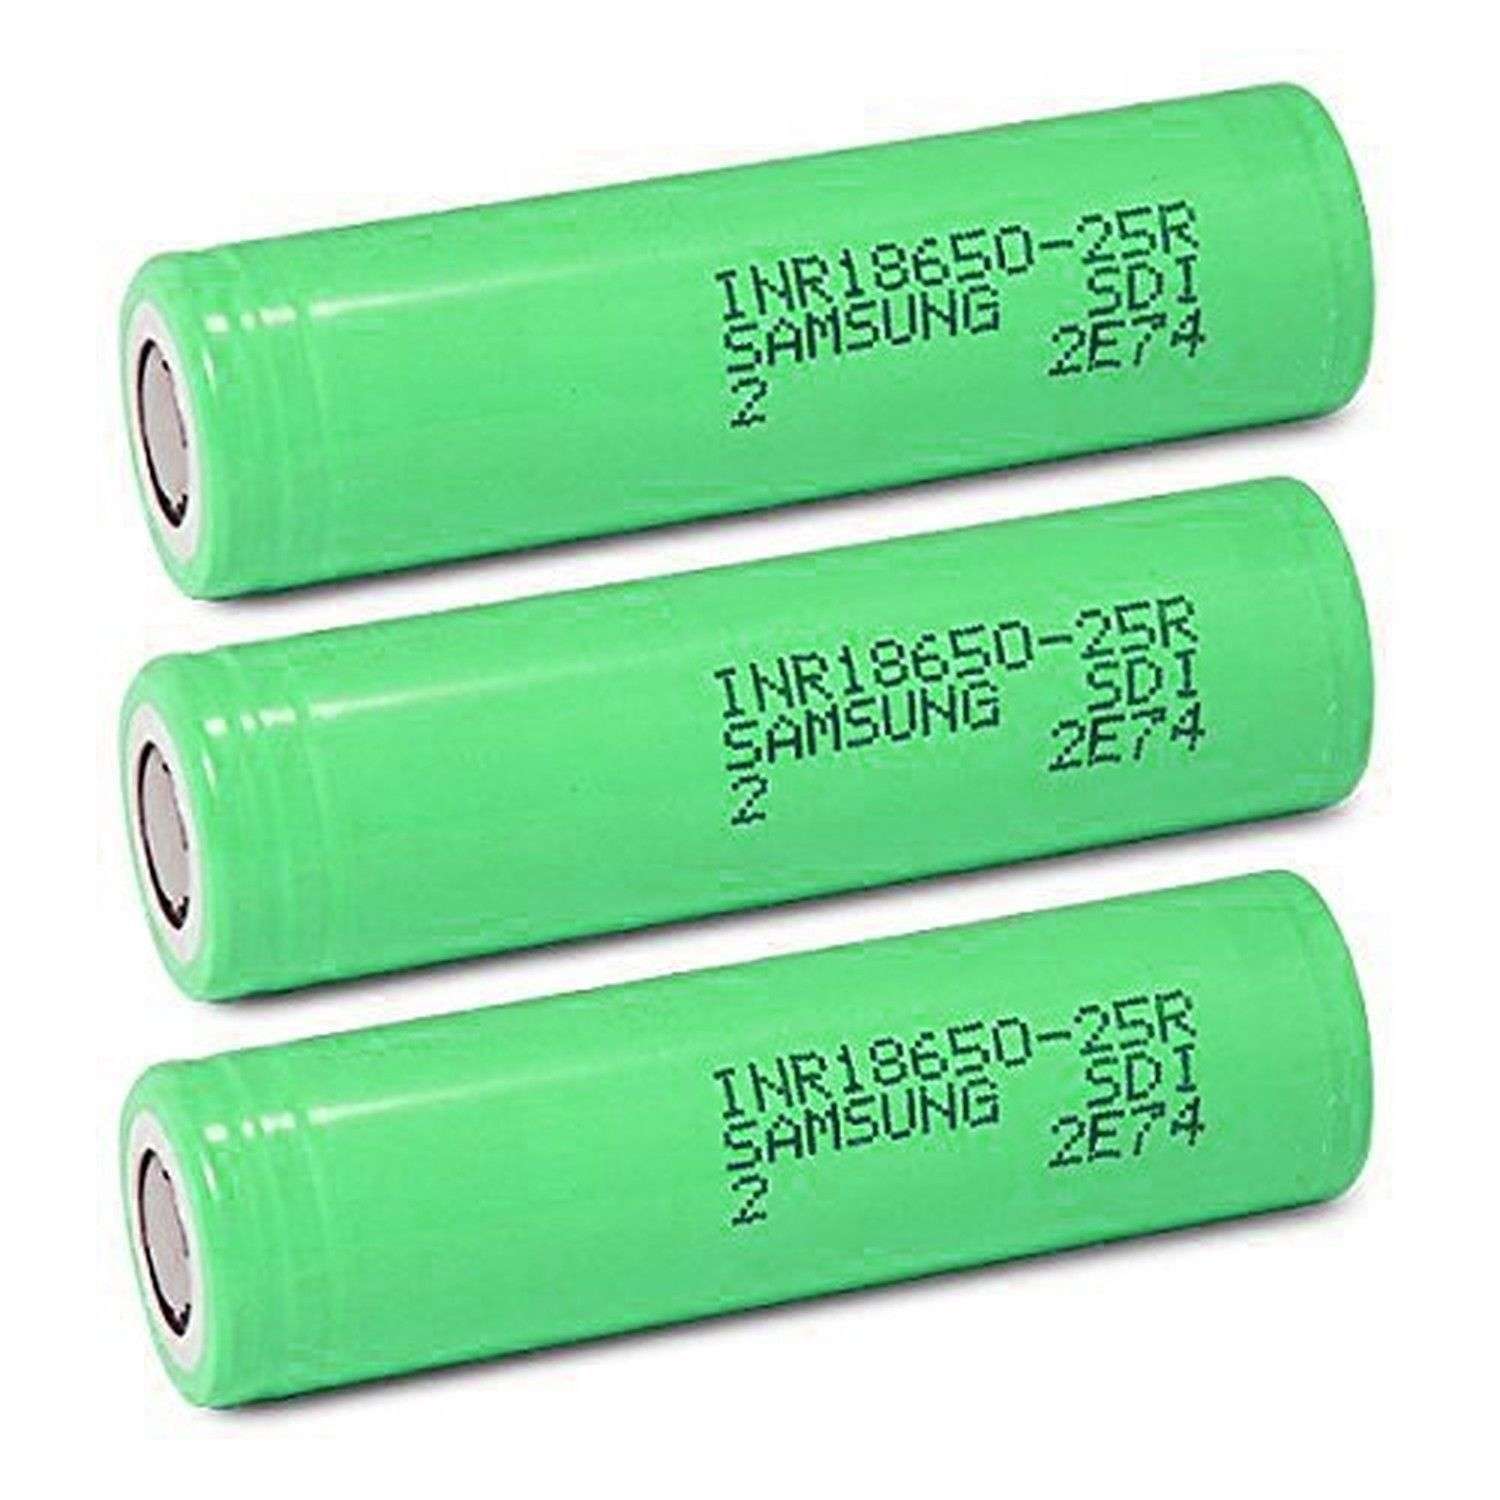 3 Samsung Inr18650-25R 18650 2500Mah 3.7V Rechargeable Flat Top Batteries - $24.95